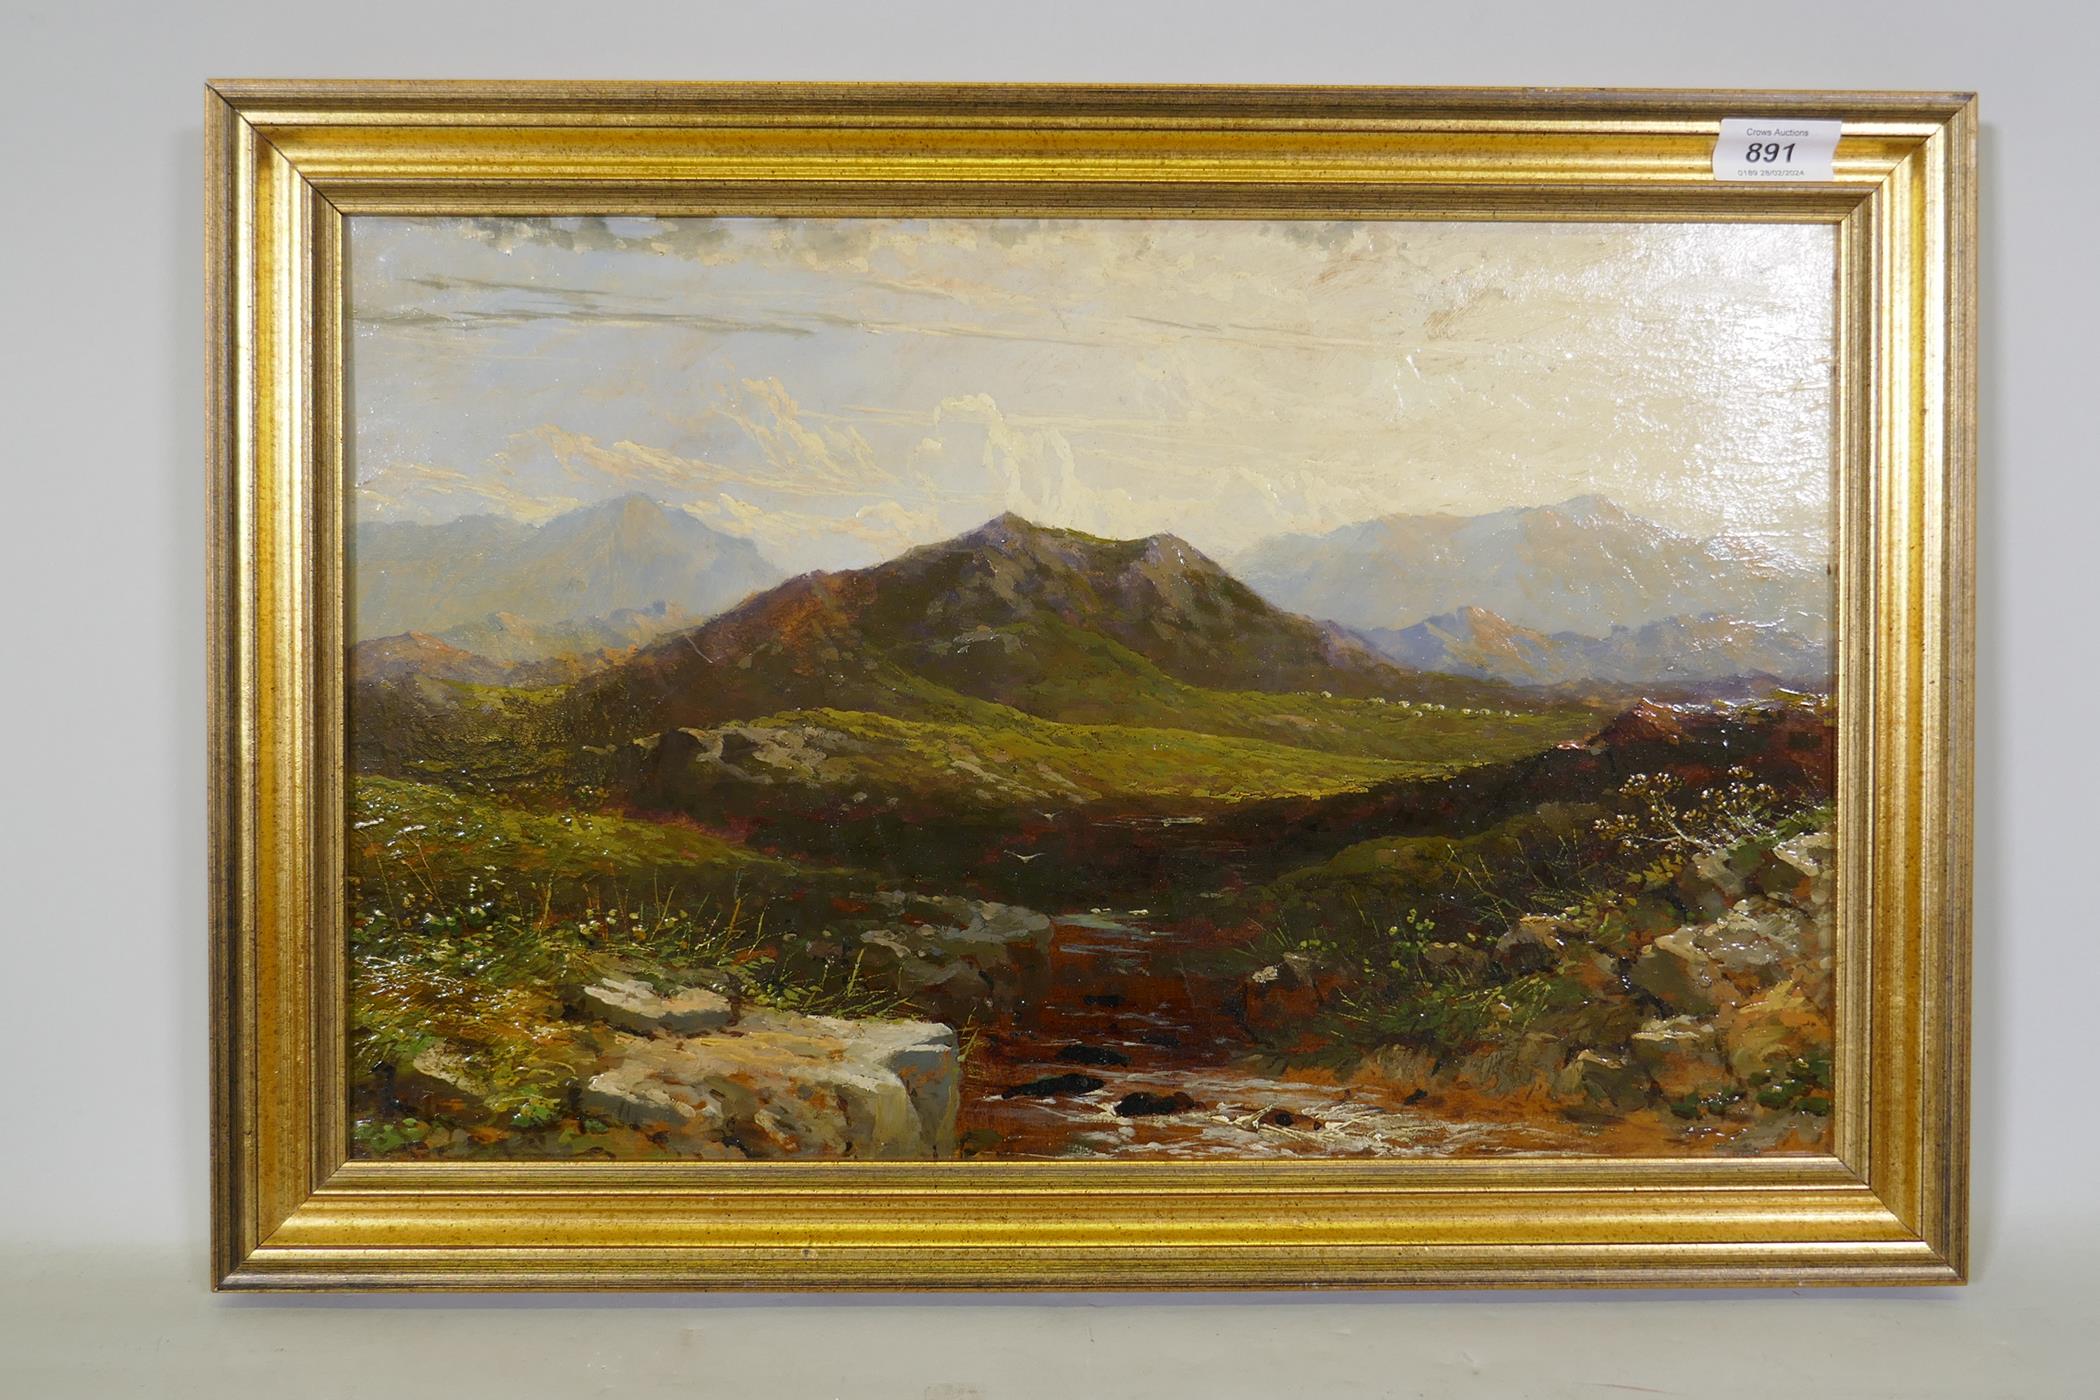 Highland landscape with sheep, unsigned, late C19th/early C20th, oil on board, 48 x 30cm - Image 2 of 4